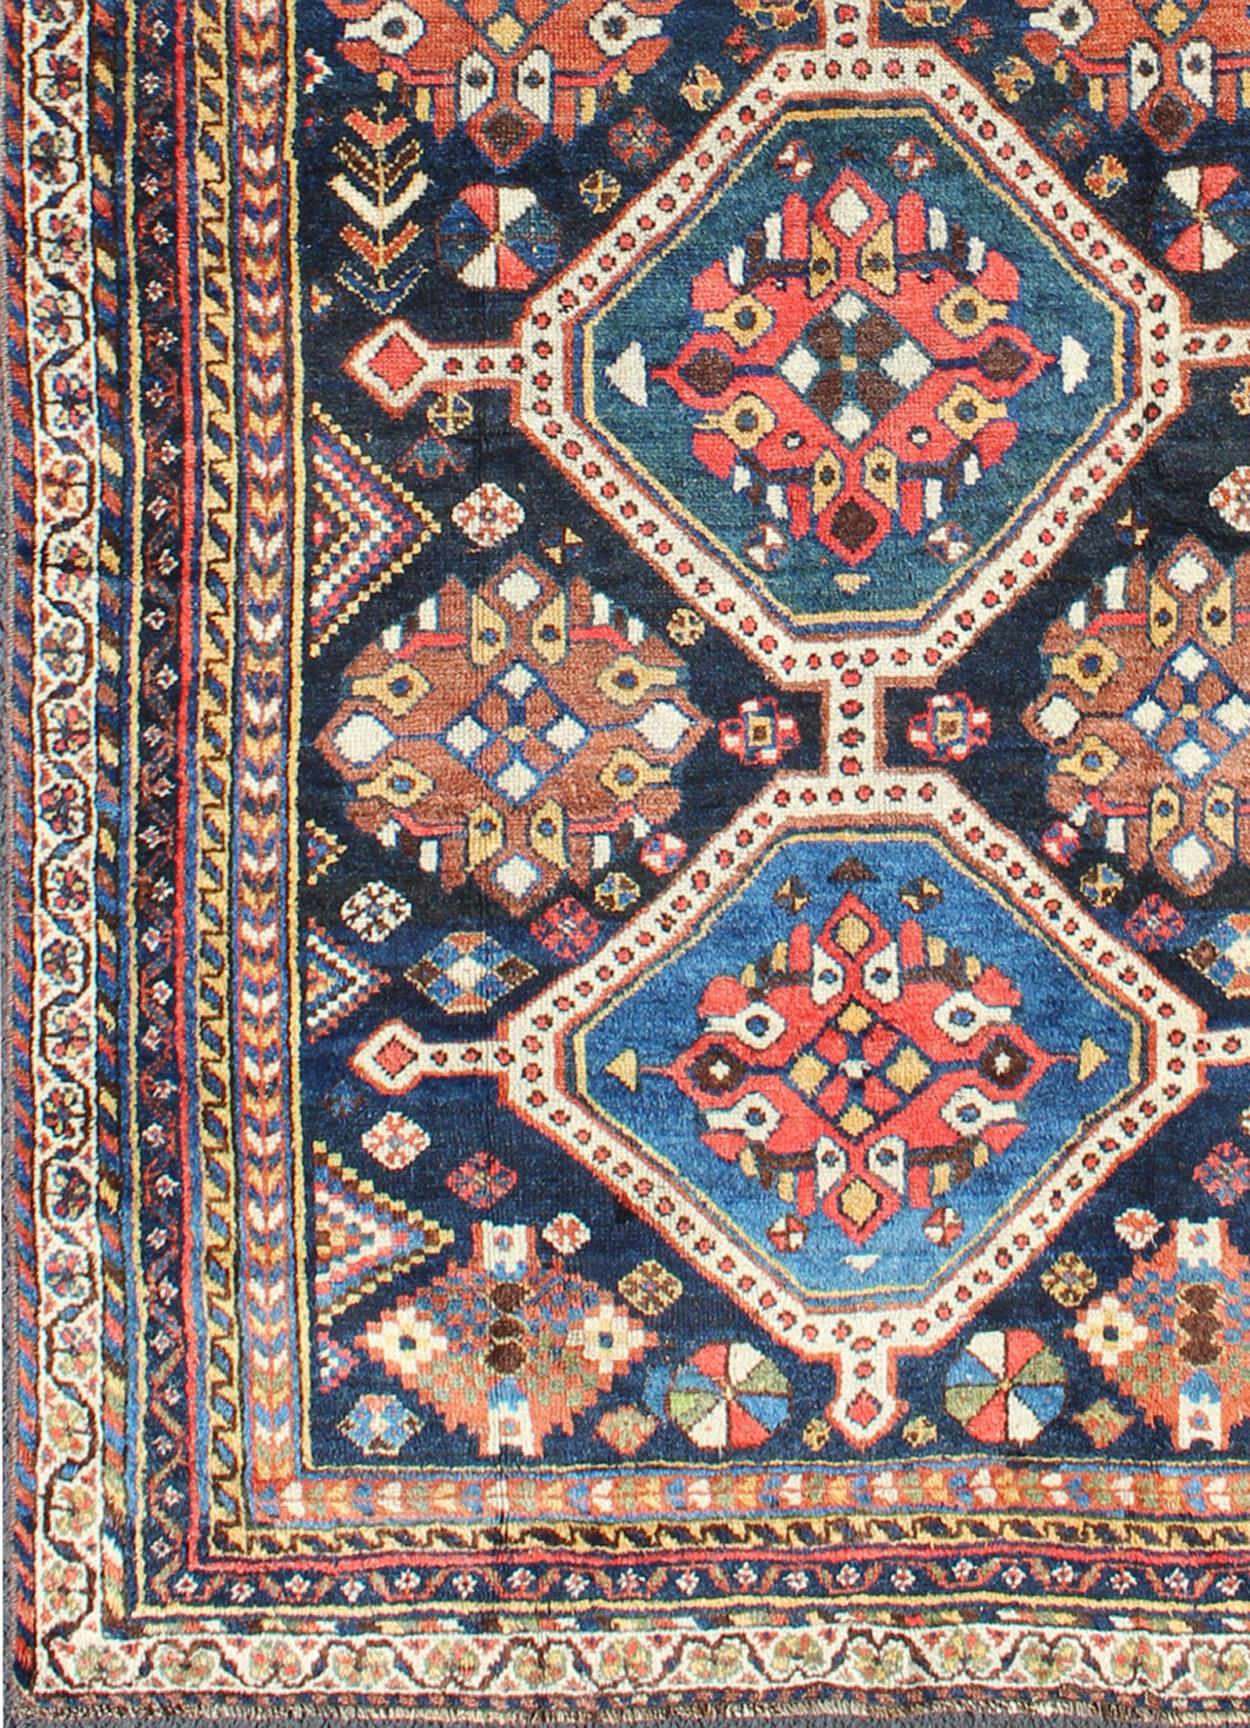 Tribal Qashqai Gallery rug from Persia with geometric designs in multi-colors, rug ema-7551, country of origin / type: Iran / Qashqai, circa 1910.

The Qashqai nomads are found in the Fars province in southwest Iran. They move twice a year, between